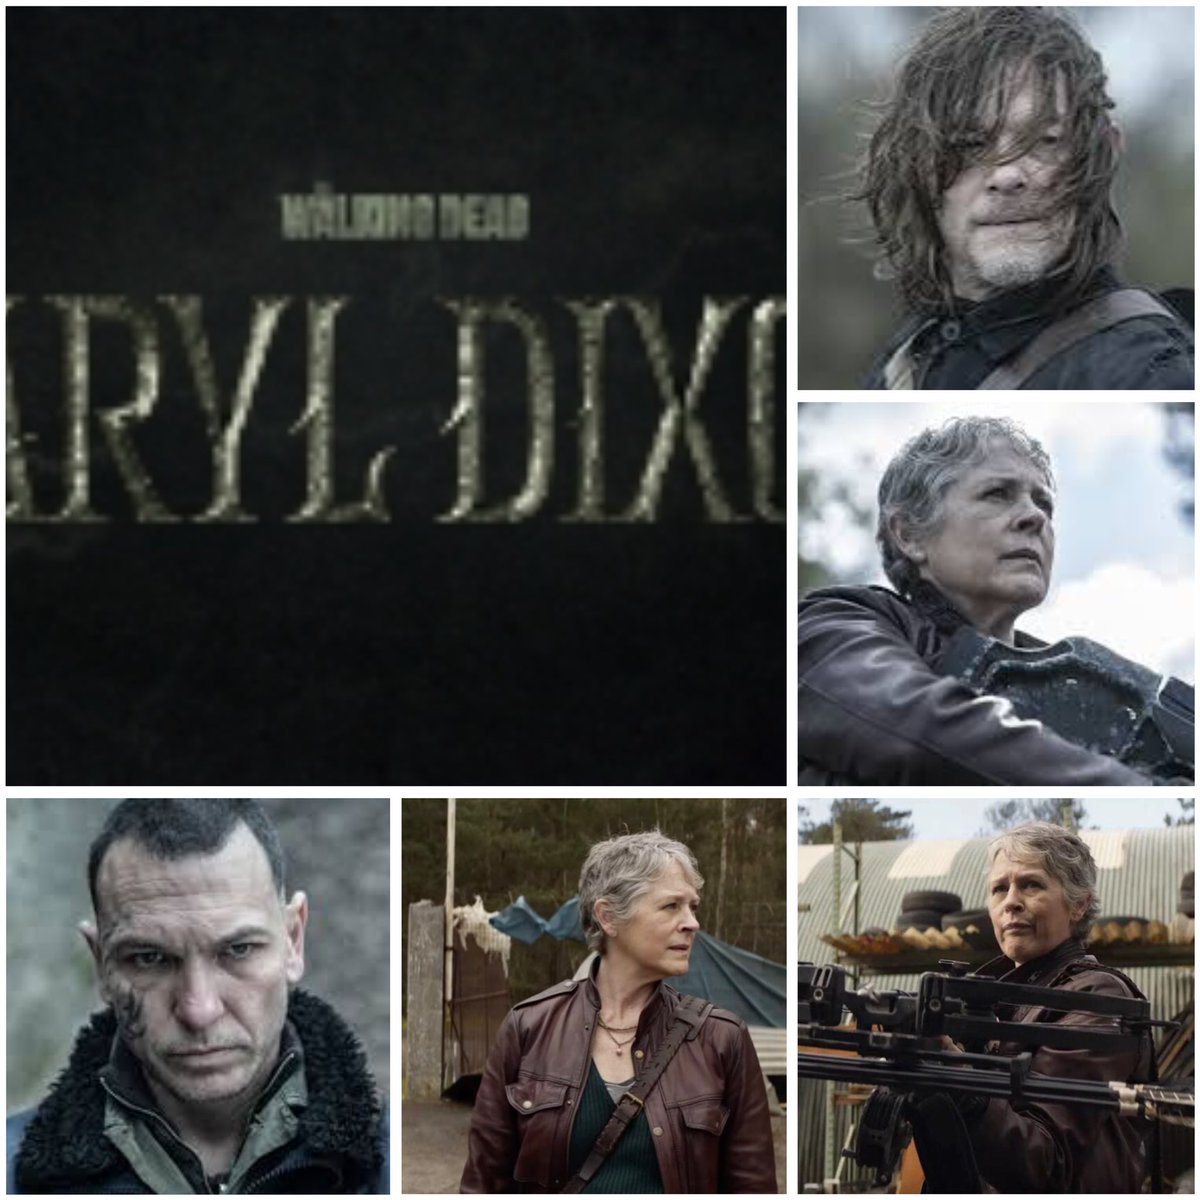 Reunited: The Daryl Dixon & Carol Peletier story continues. Coming this summer our favourites Norman Reedus & Melissa McBride join forces once again for - Daryl Dixon: The Book of Carol 👌

@wwwbigbaldhead  @mcbridemelissa @TheWalkingDead @WalkingDead_AMC 

#FortNormanReedus #BOC